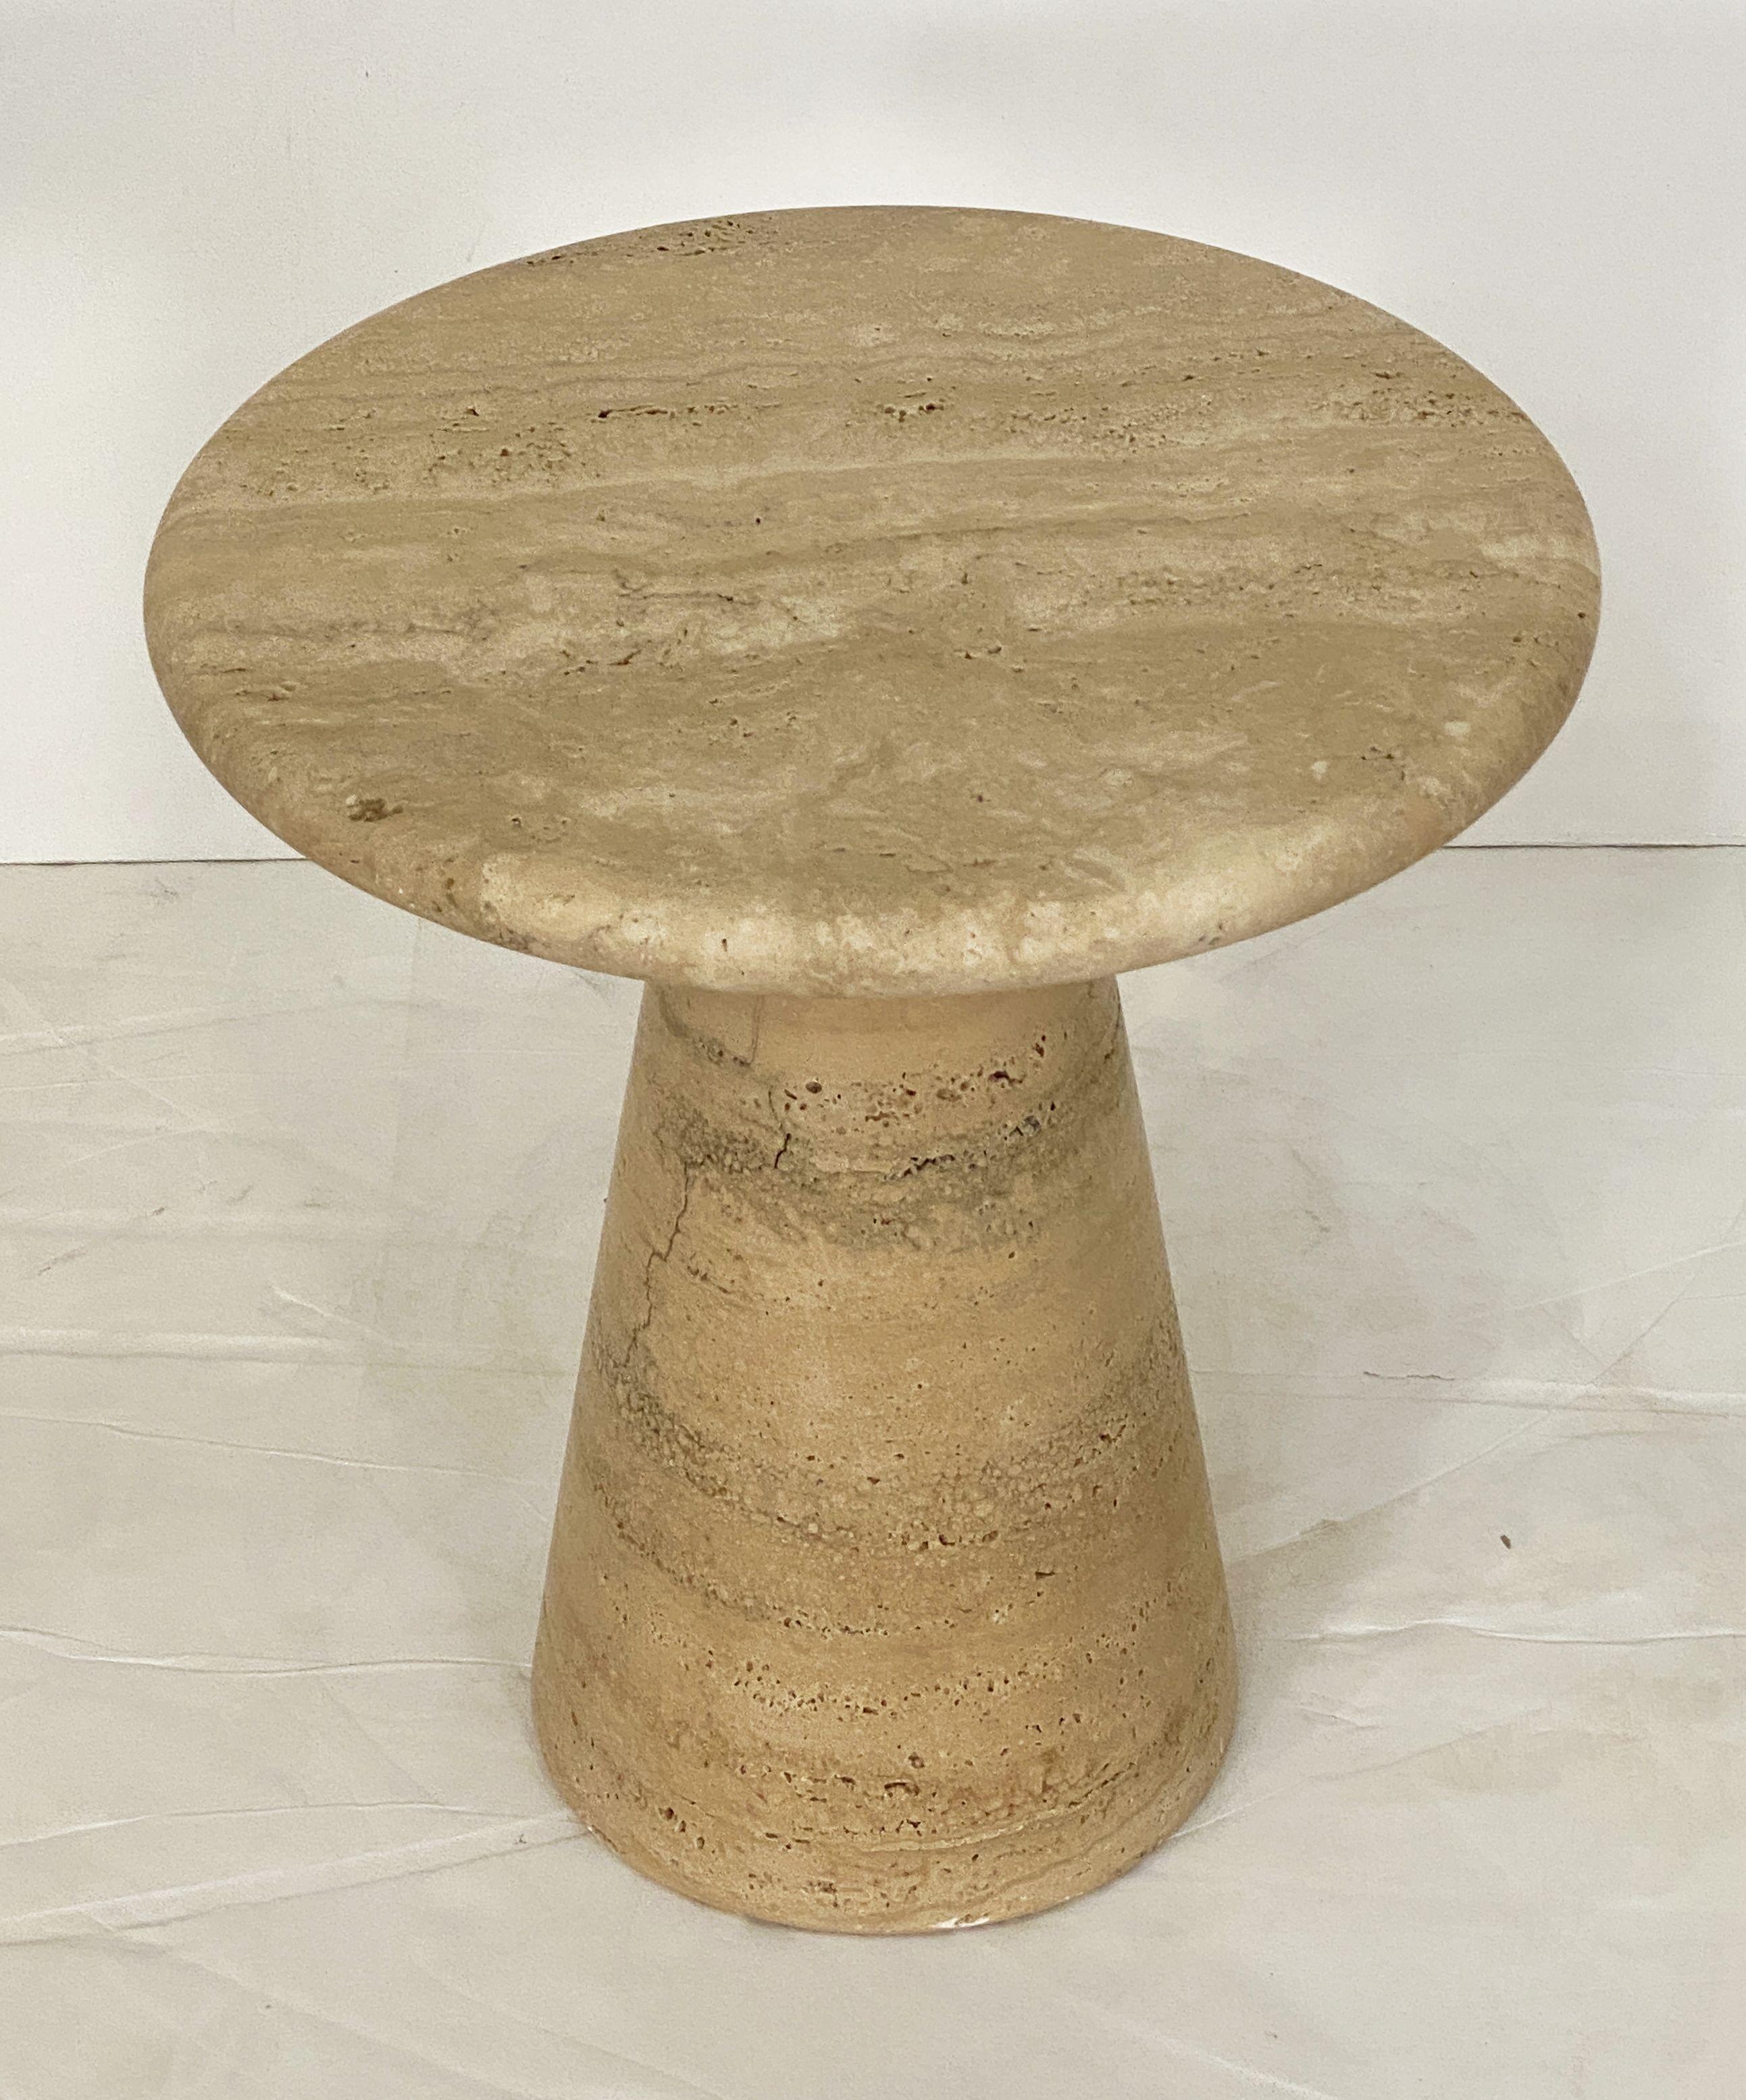 Modernist Conical Table of Travertine Stone from Italy (Four Available) For Sale 10